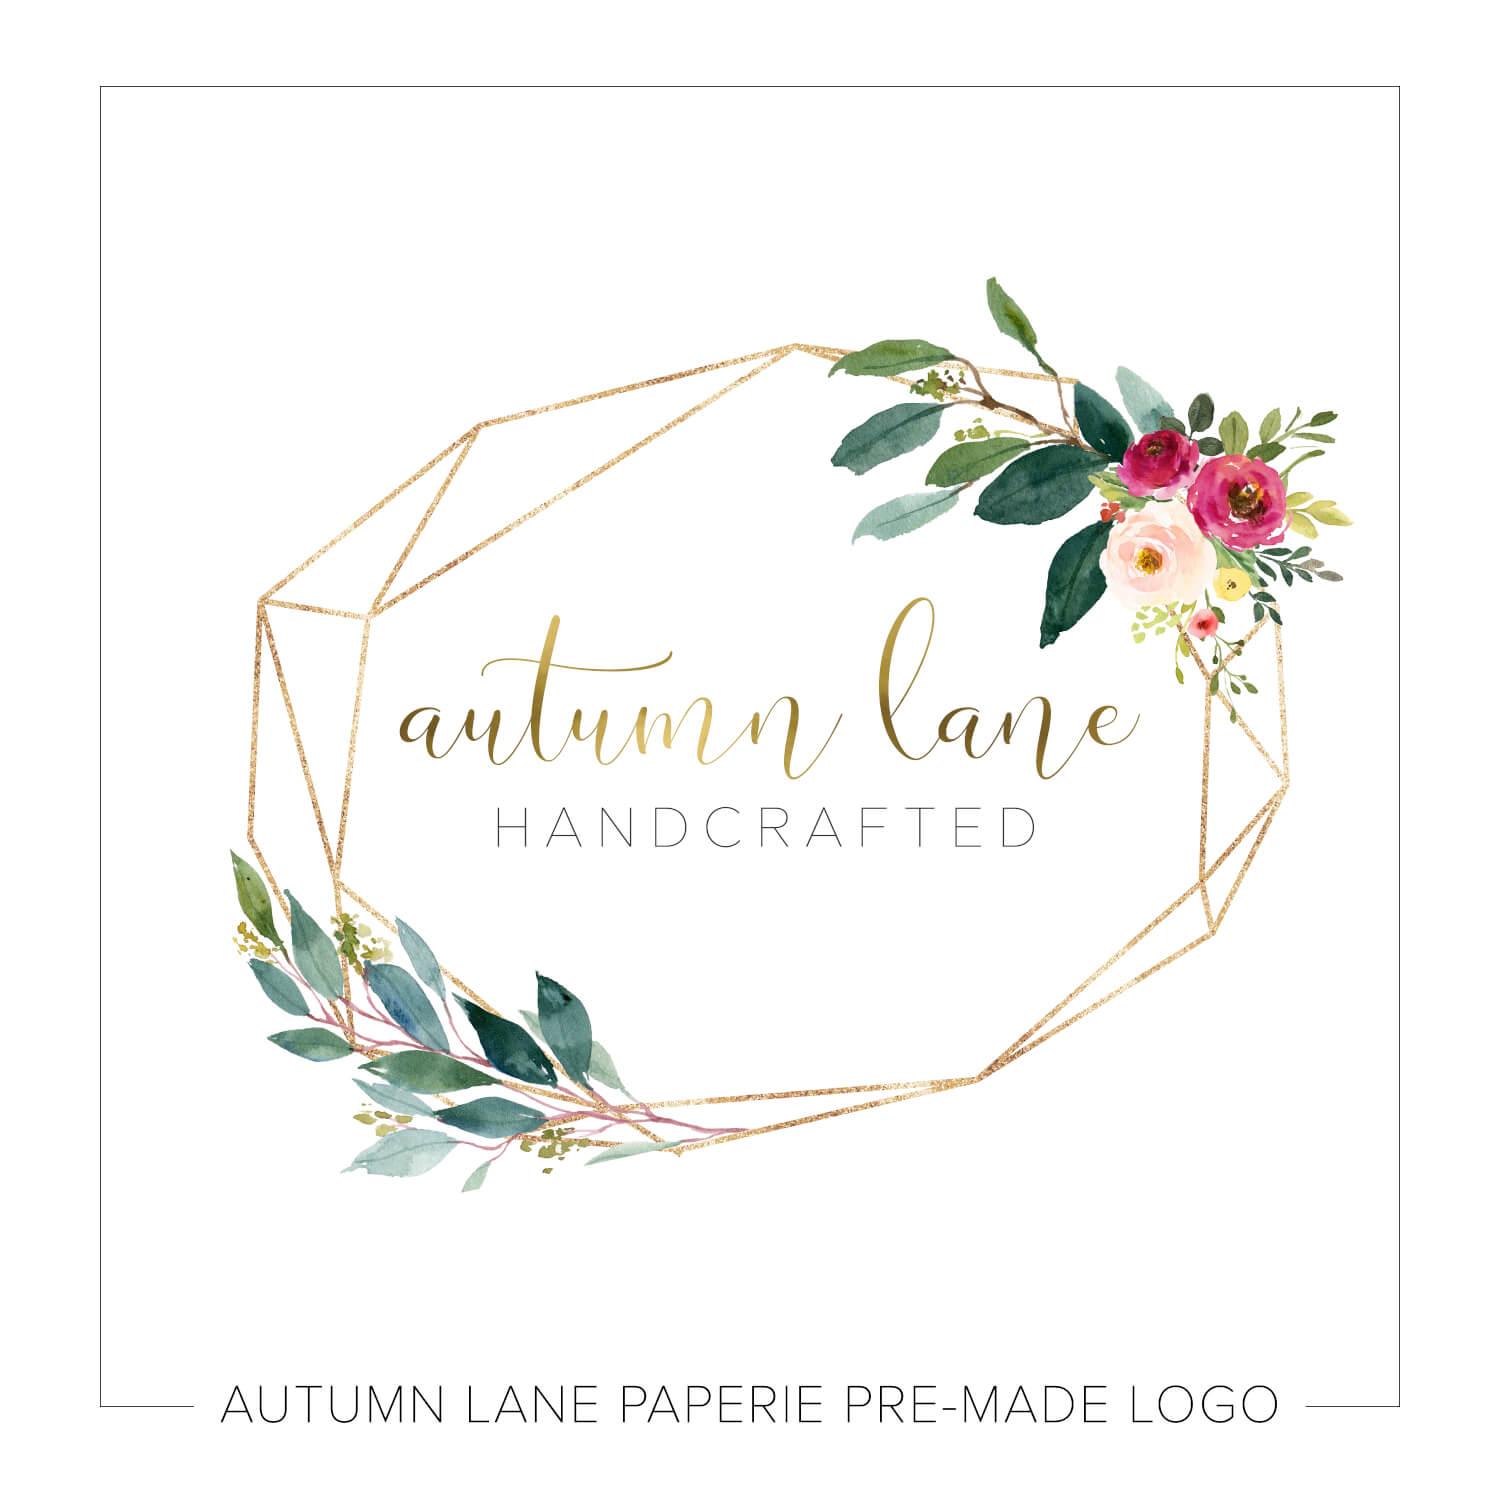 Rustic Flower Logo - Rustic Geometric and Floral Logo M35. Autumn Lane Paperie